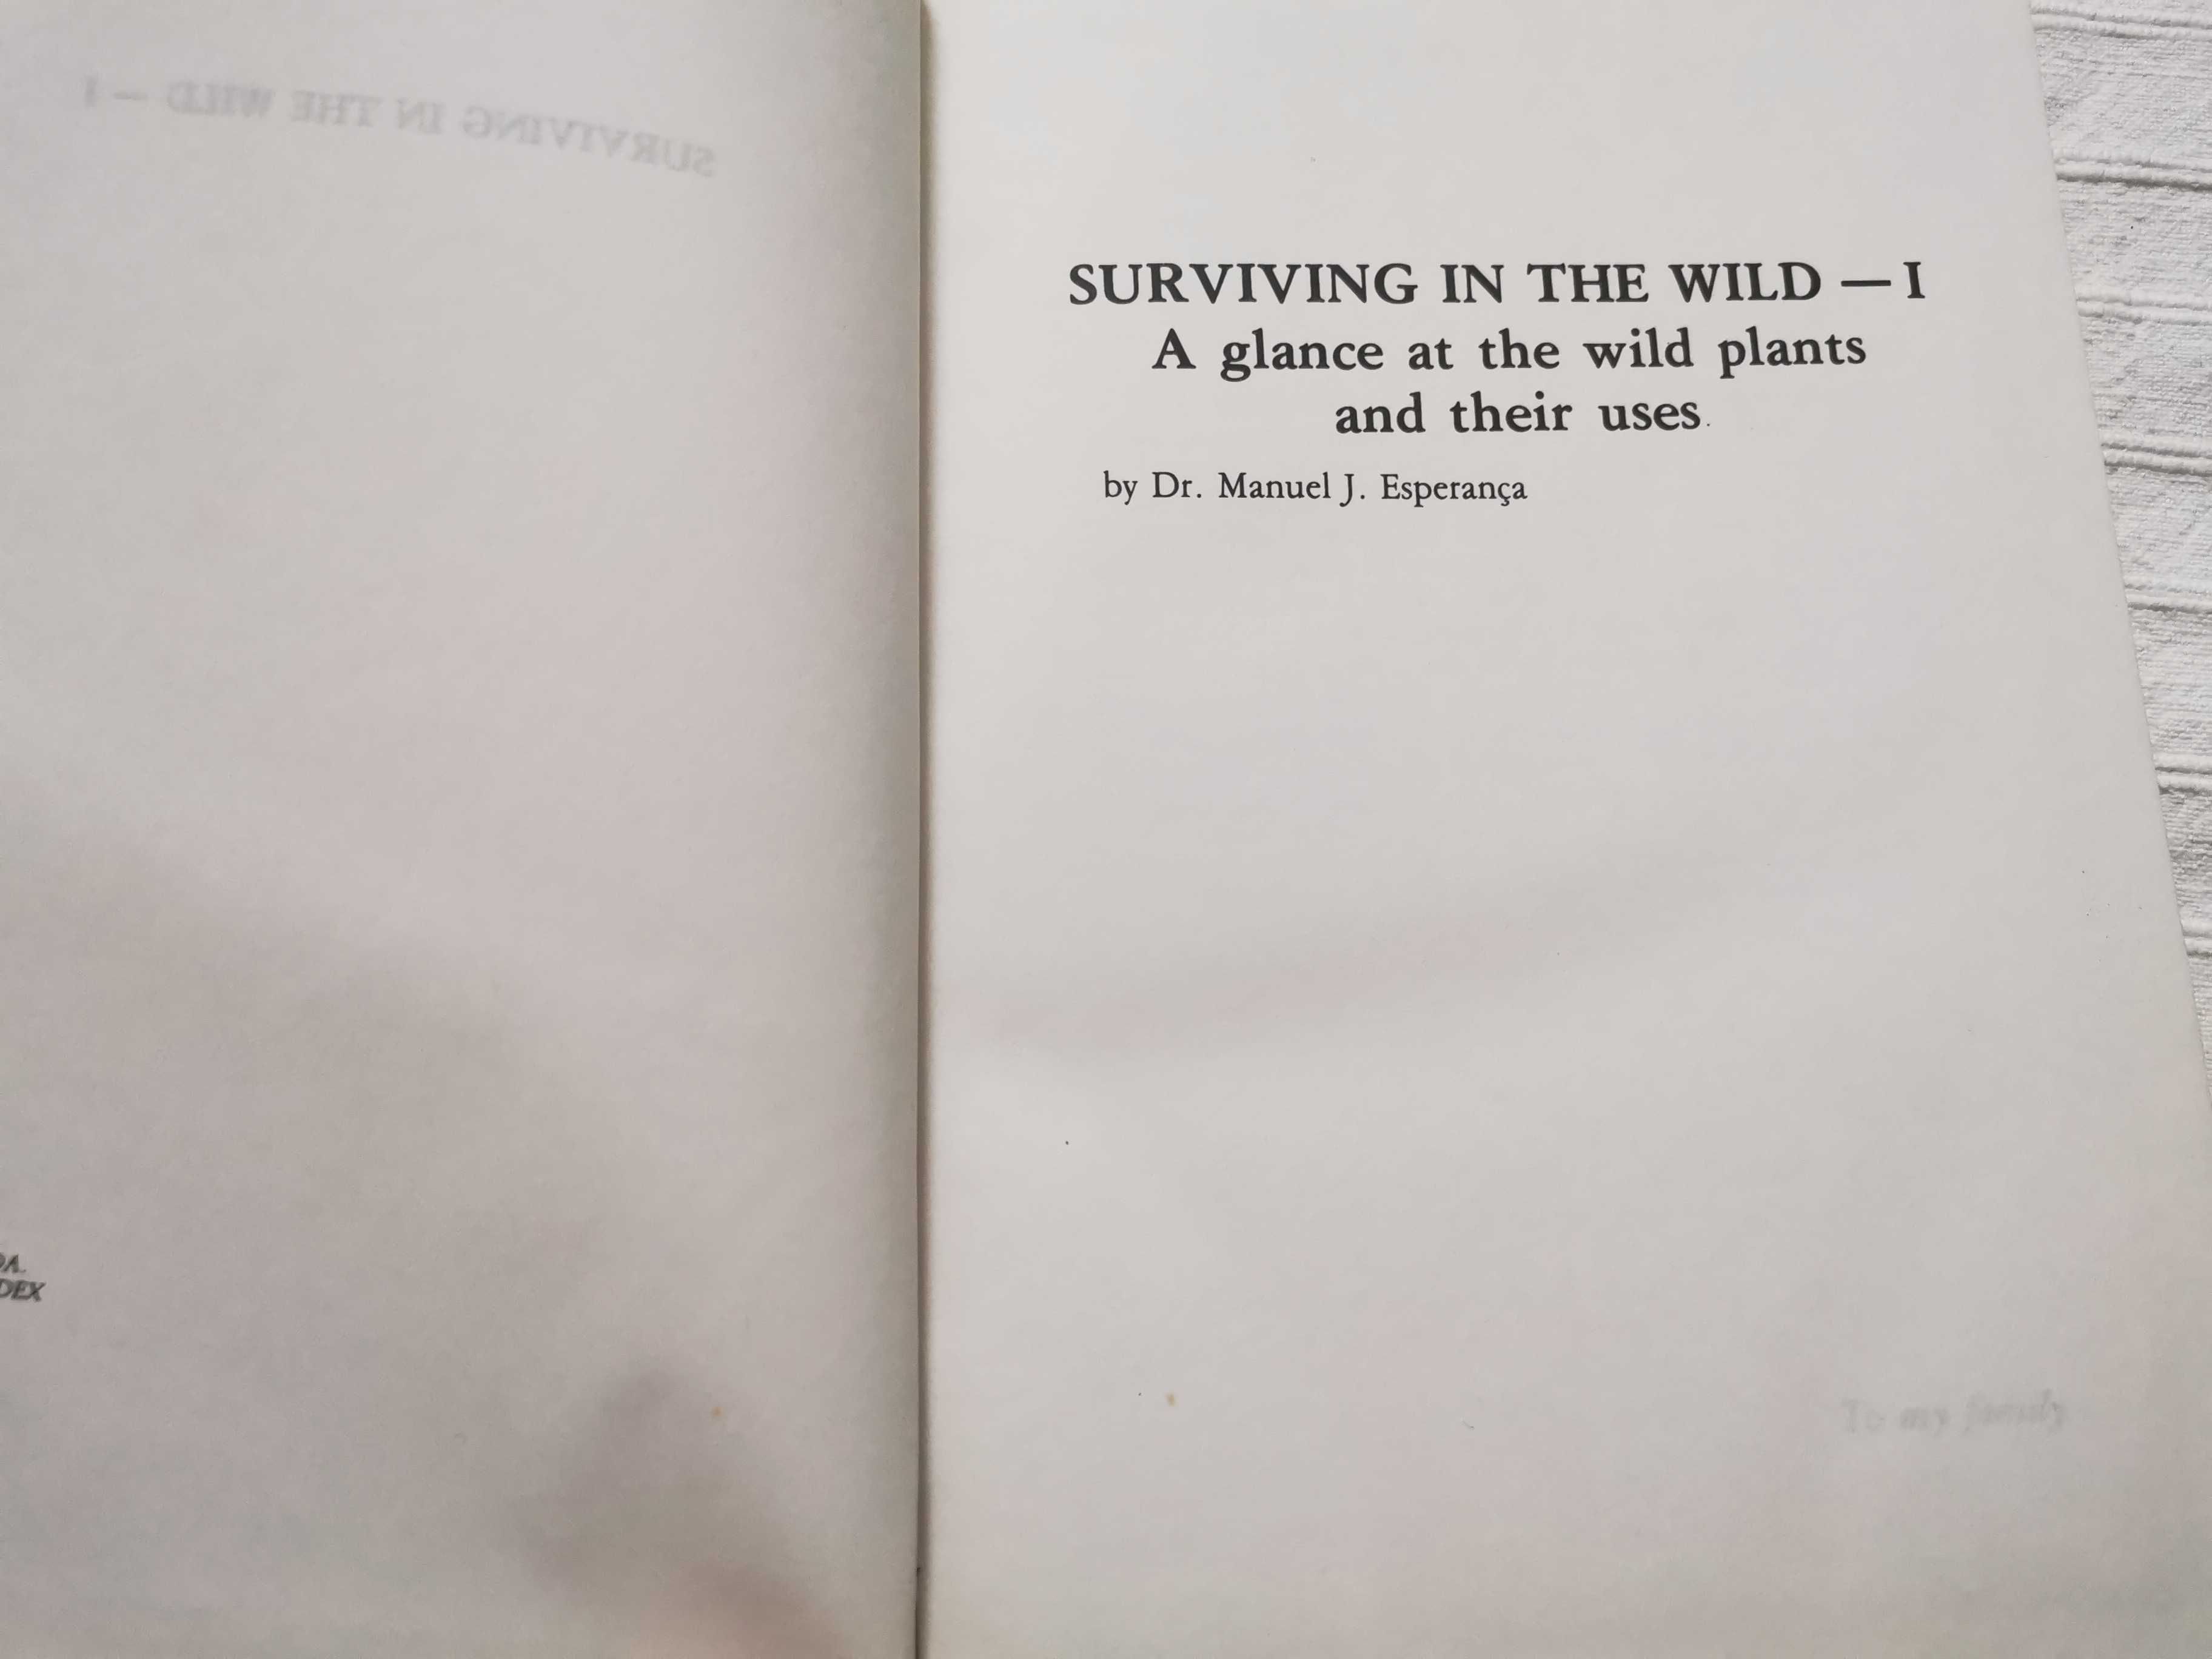 SURVIVING IN THE WILD: A Glance at the Wild Plants and their Uses